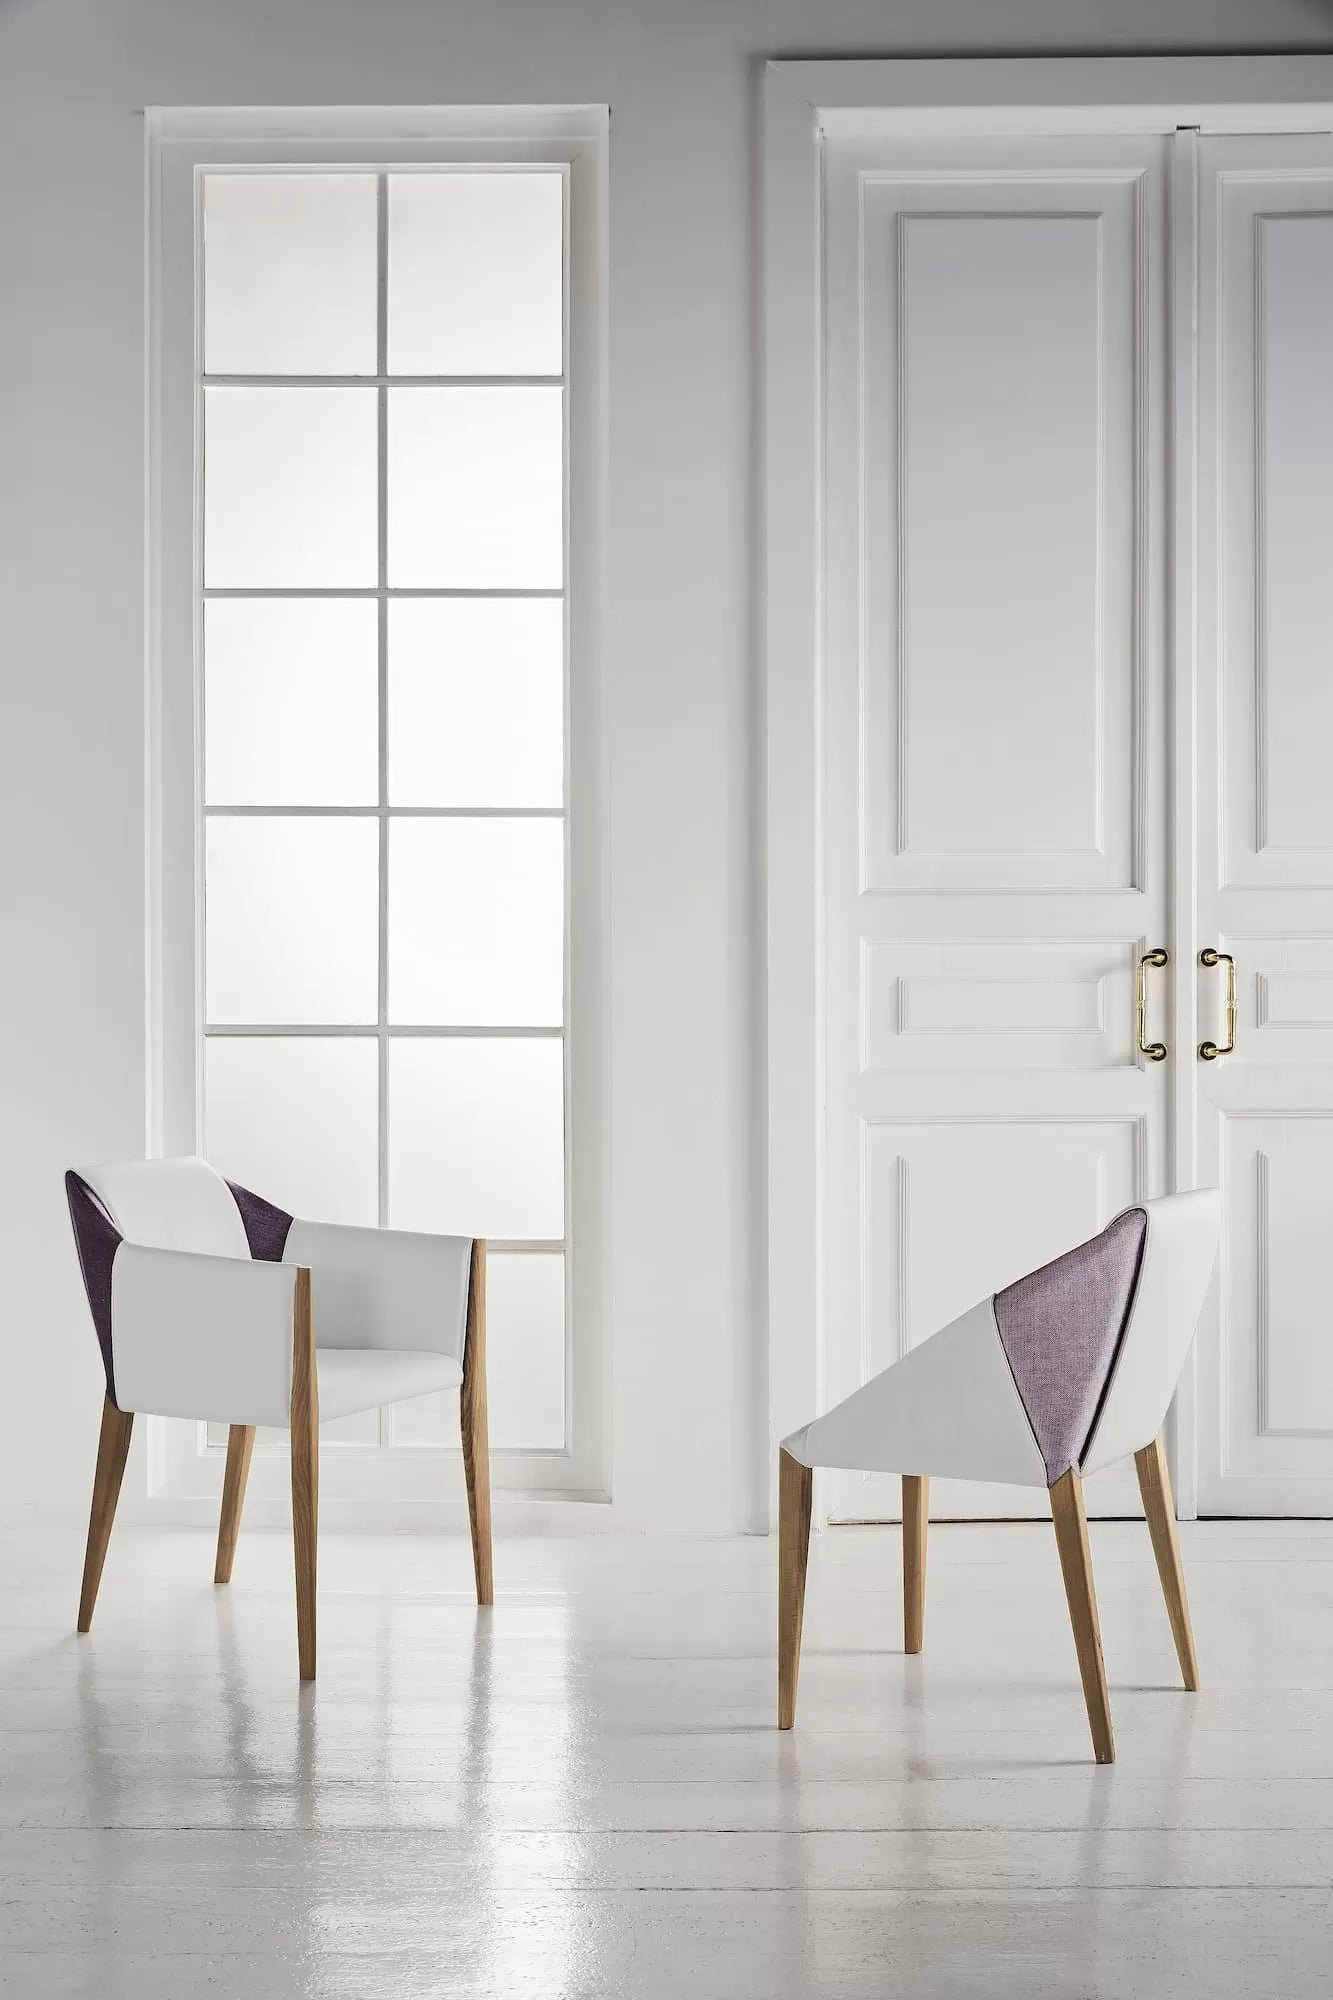 Sveva Chair with Solid wood frame